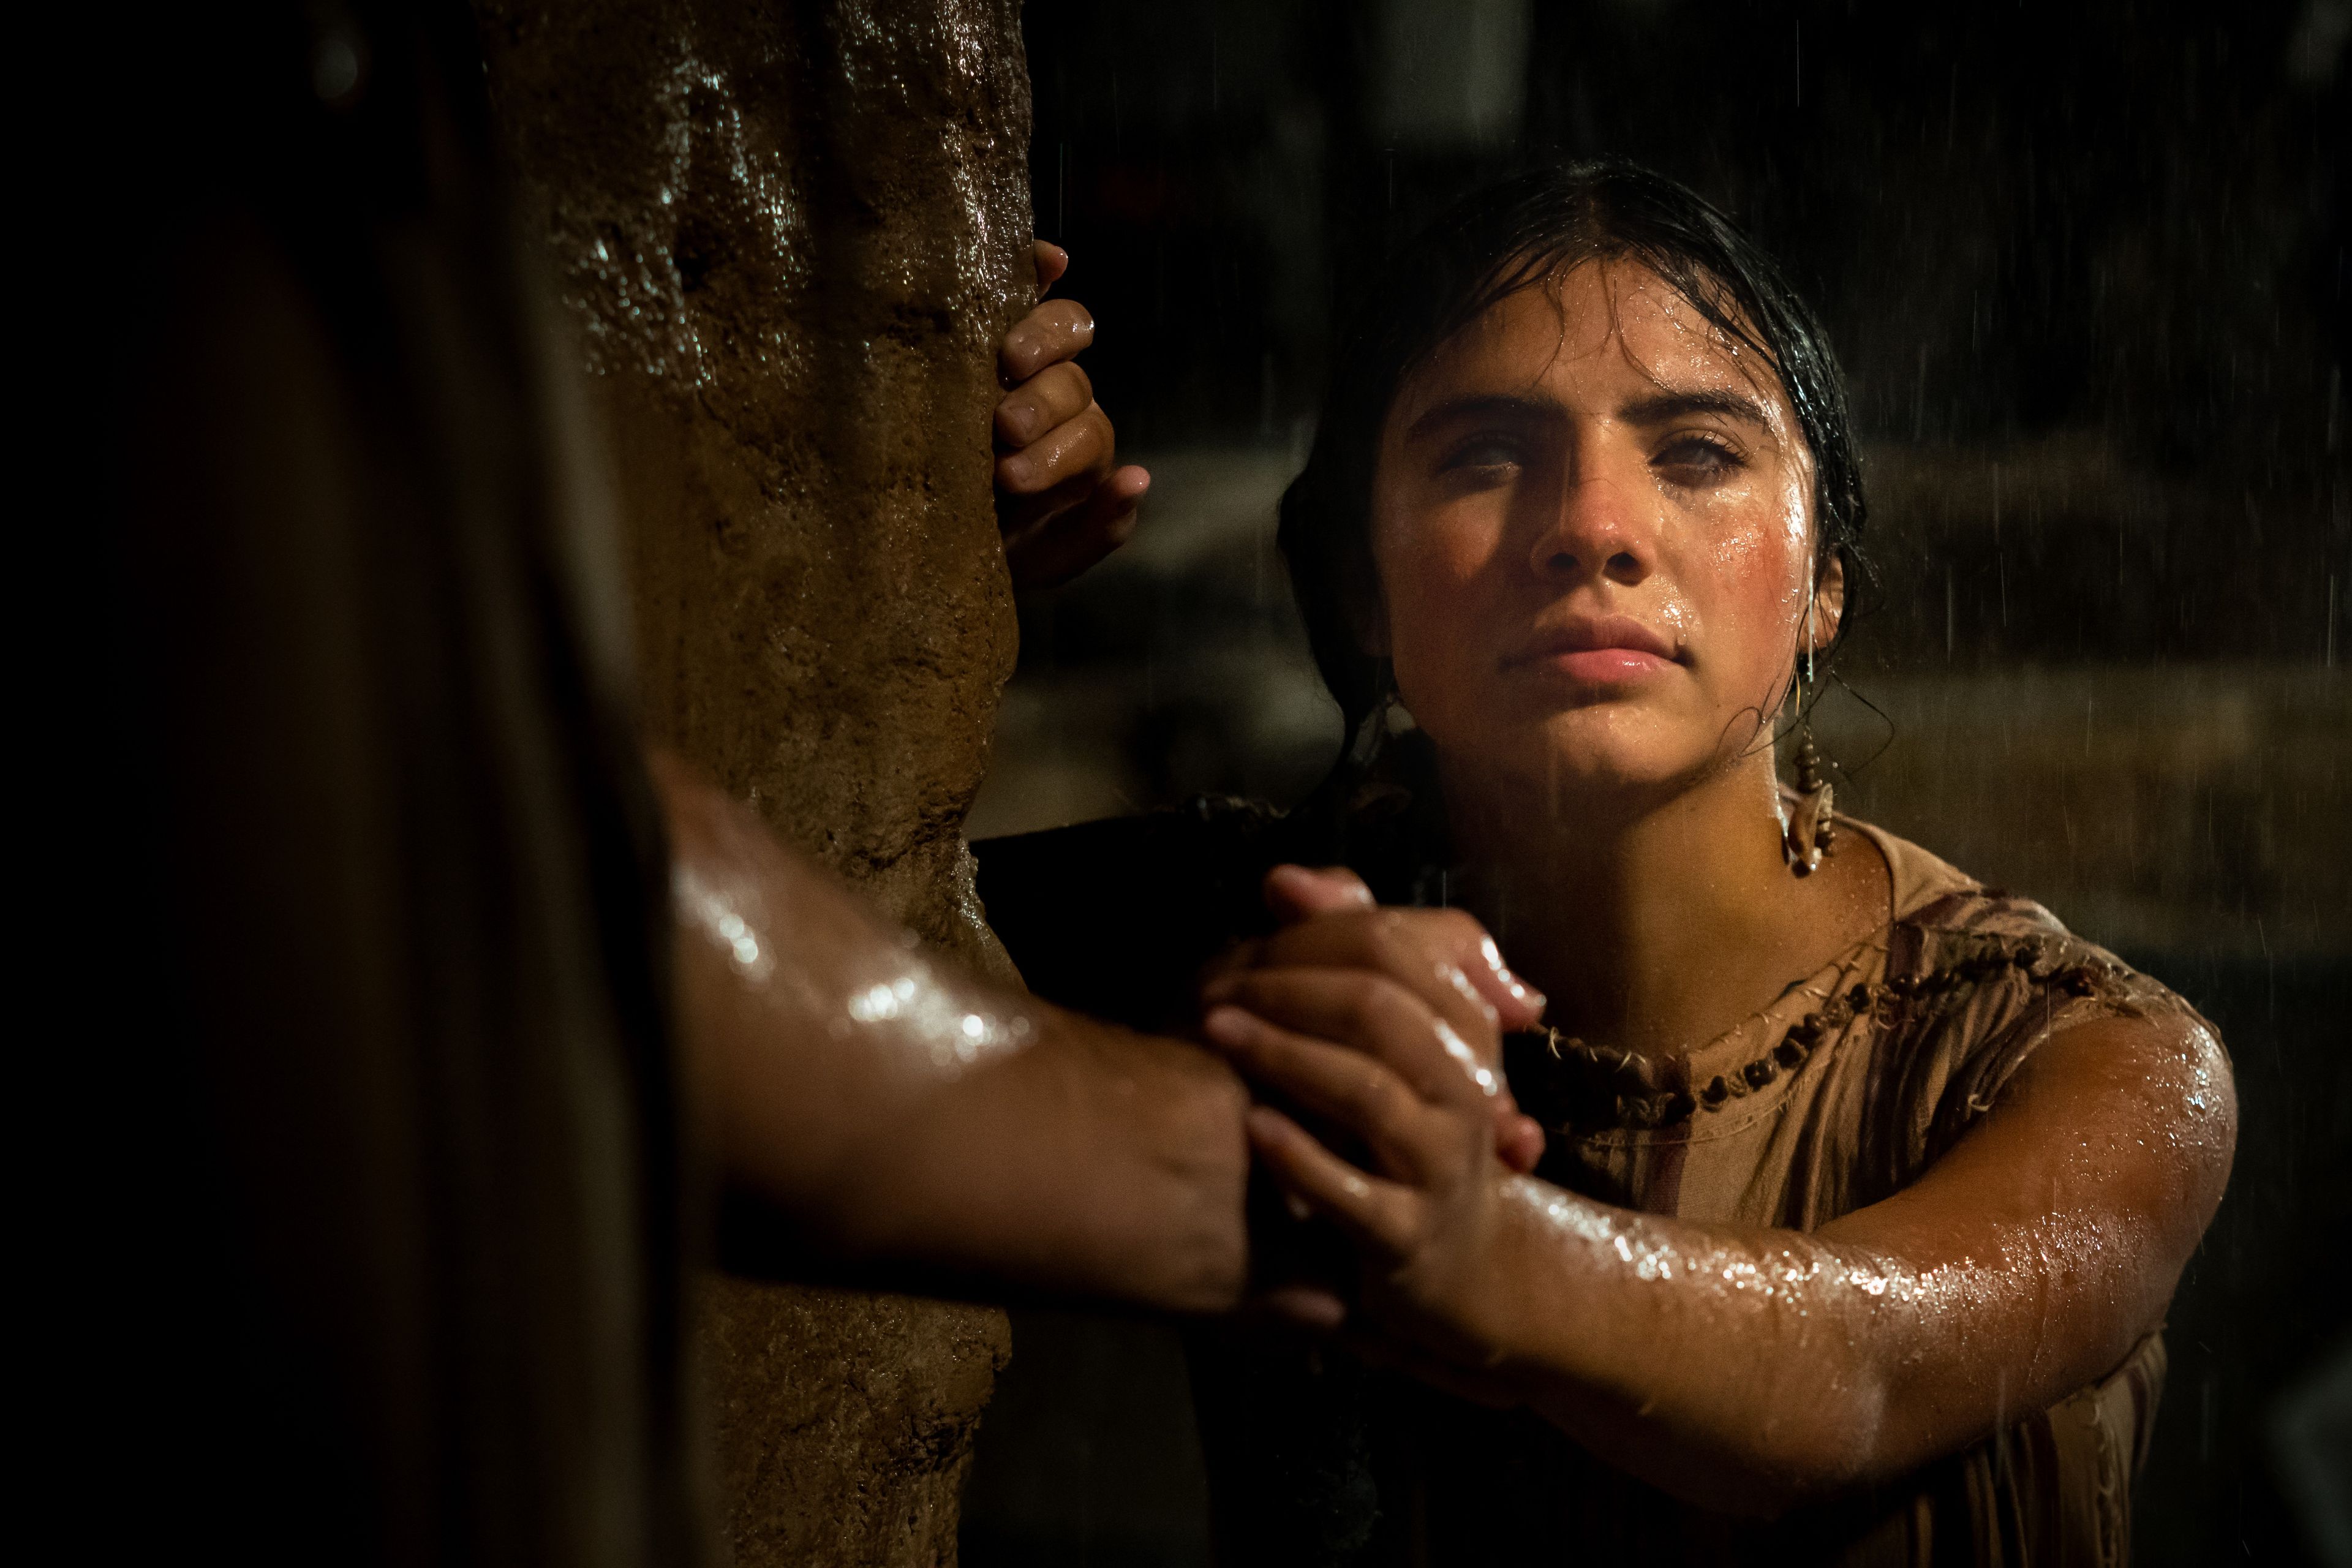 A flash flood sweeps people away, while a blind girl is rescued by her father.